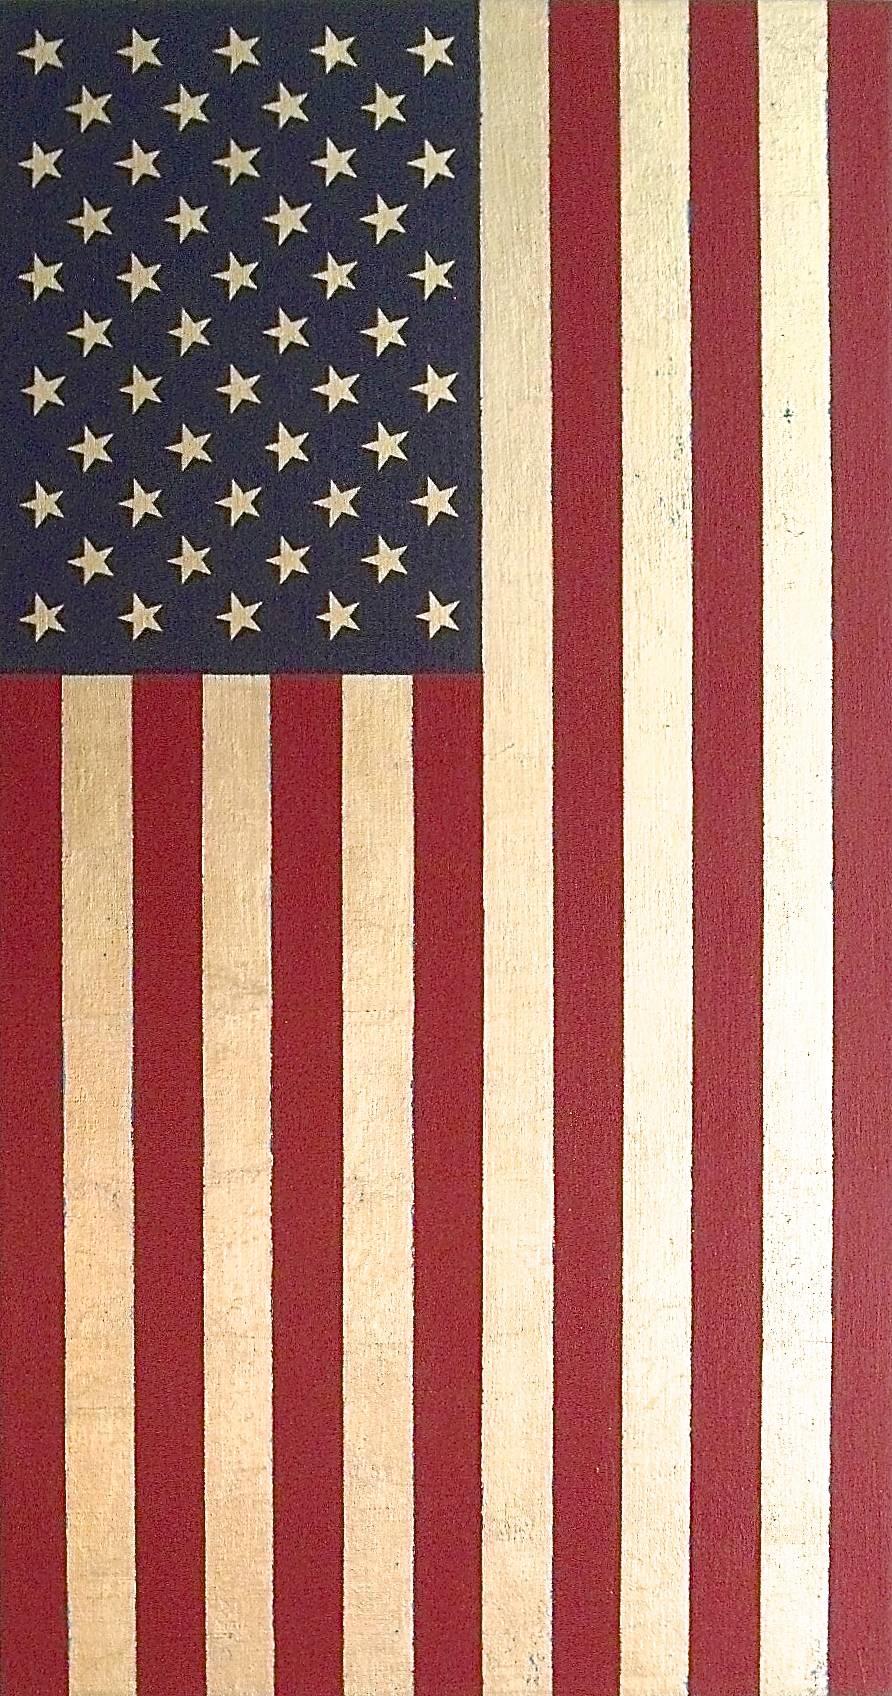  "U.S. Flag Vertical" American Pop Art Oil Paint Minimal Abstract Contemporary